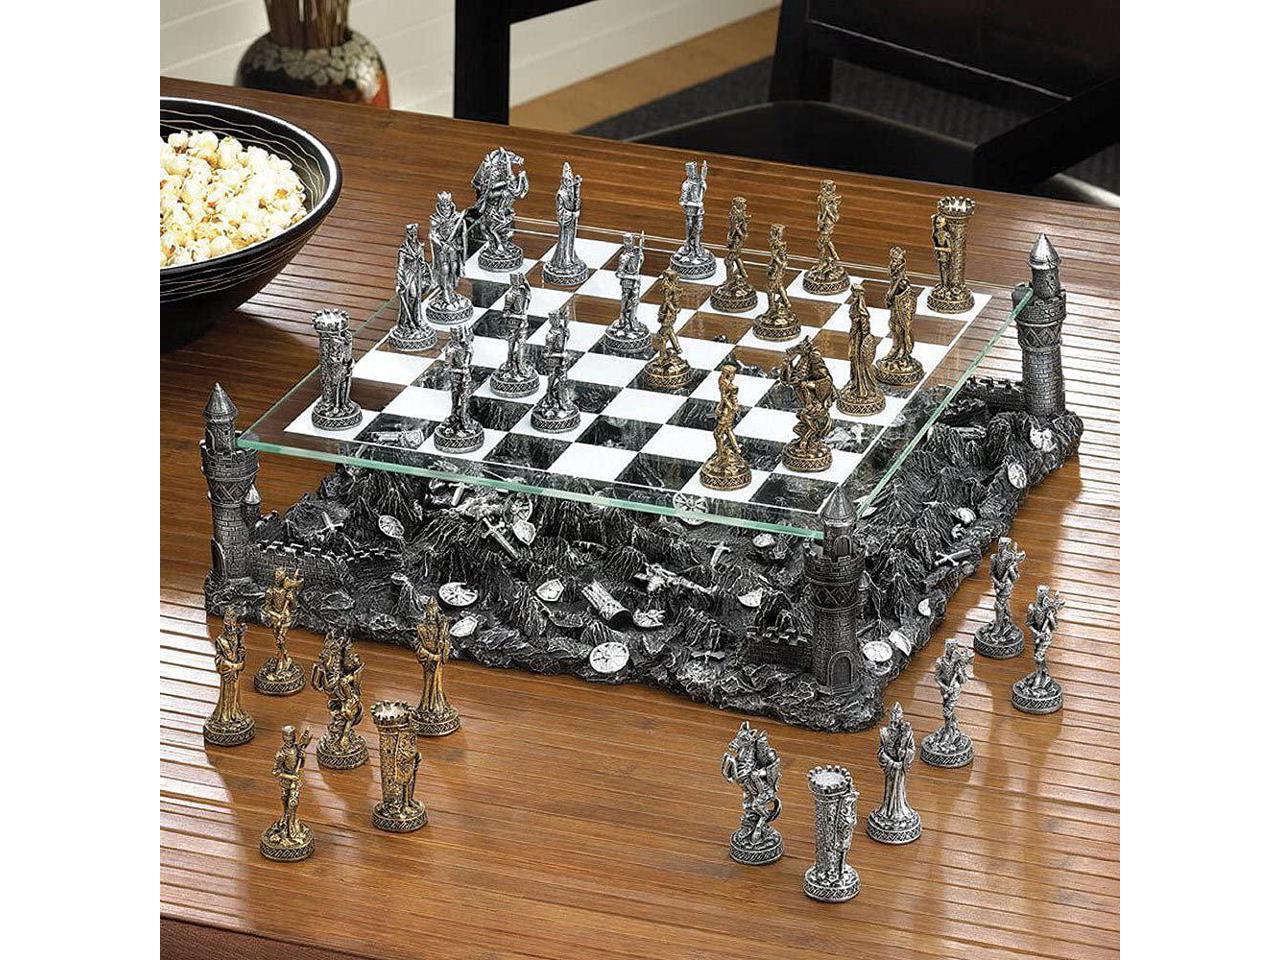 Renaissance Knight Chess Recreational Classic Strategy Game Set CHH 2127A+ 